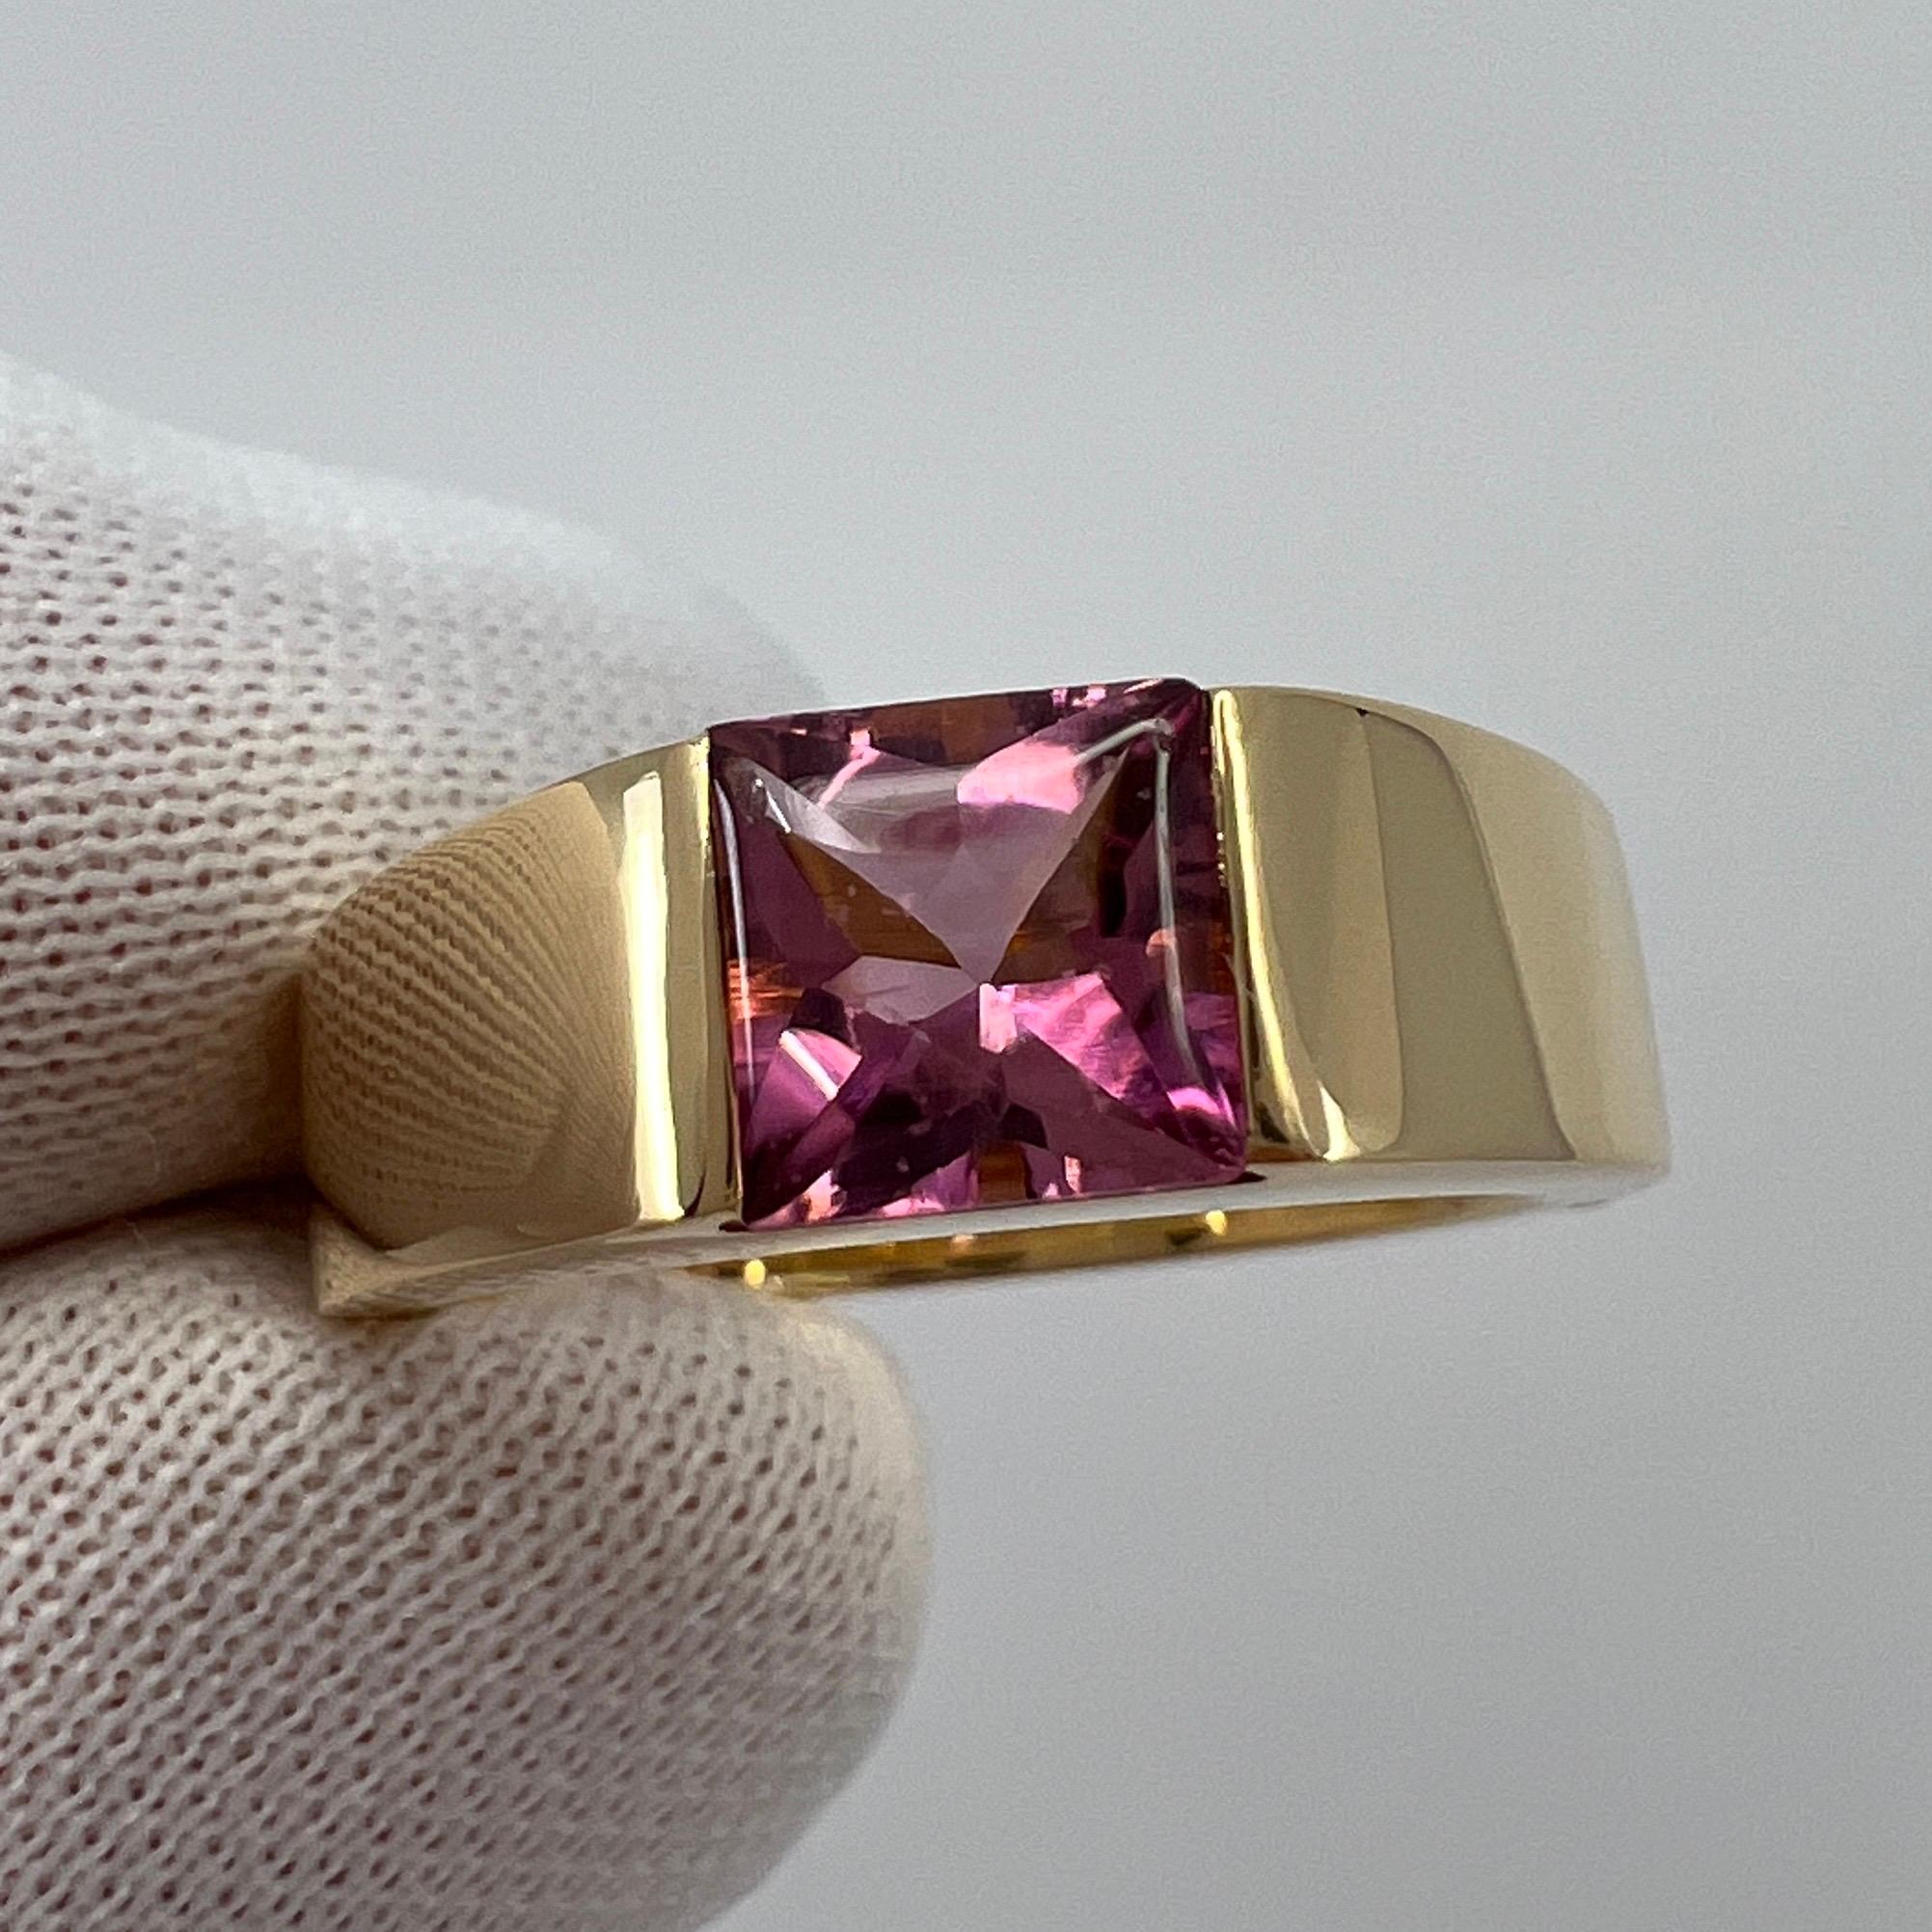 Vintage Cartier Pink Rubellite Tourmaline 18 Karat Yellow Gold Tank Ring.

Stunning yellow gold ring with a 5.8mm tension set deep pink purple fancy-cut tourmaline. Fine jewellery houses like Cartier only use the finest of gemstones and this